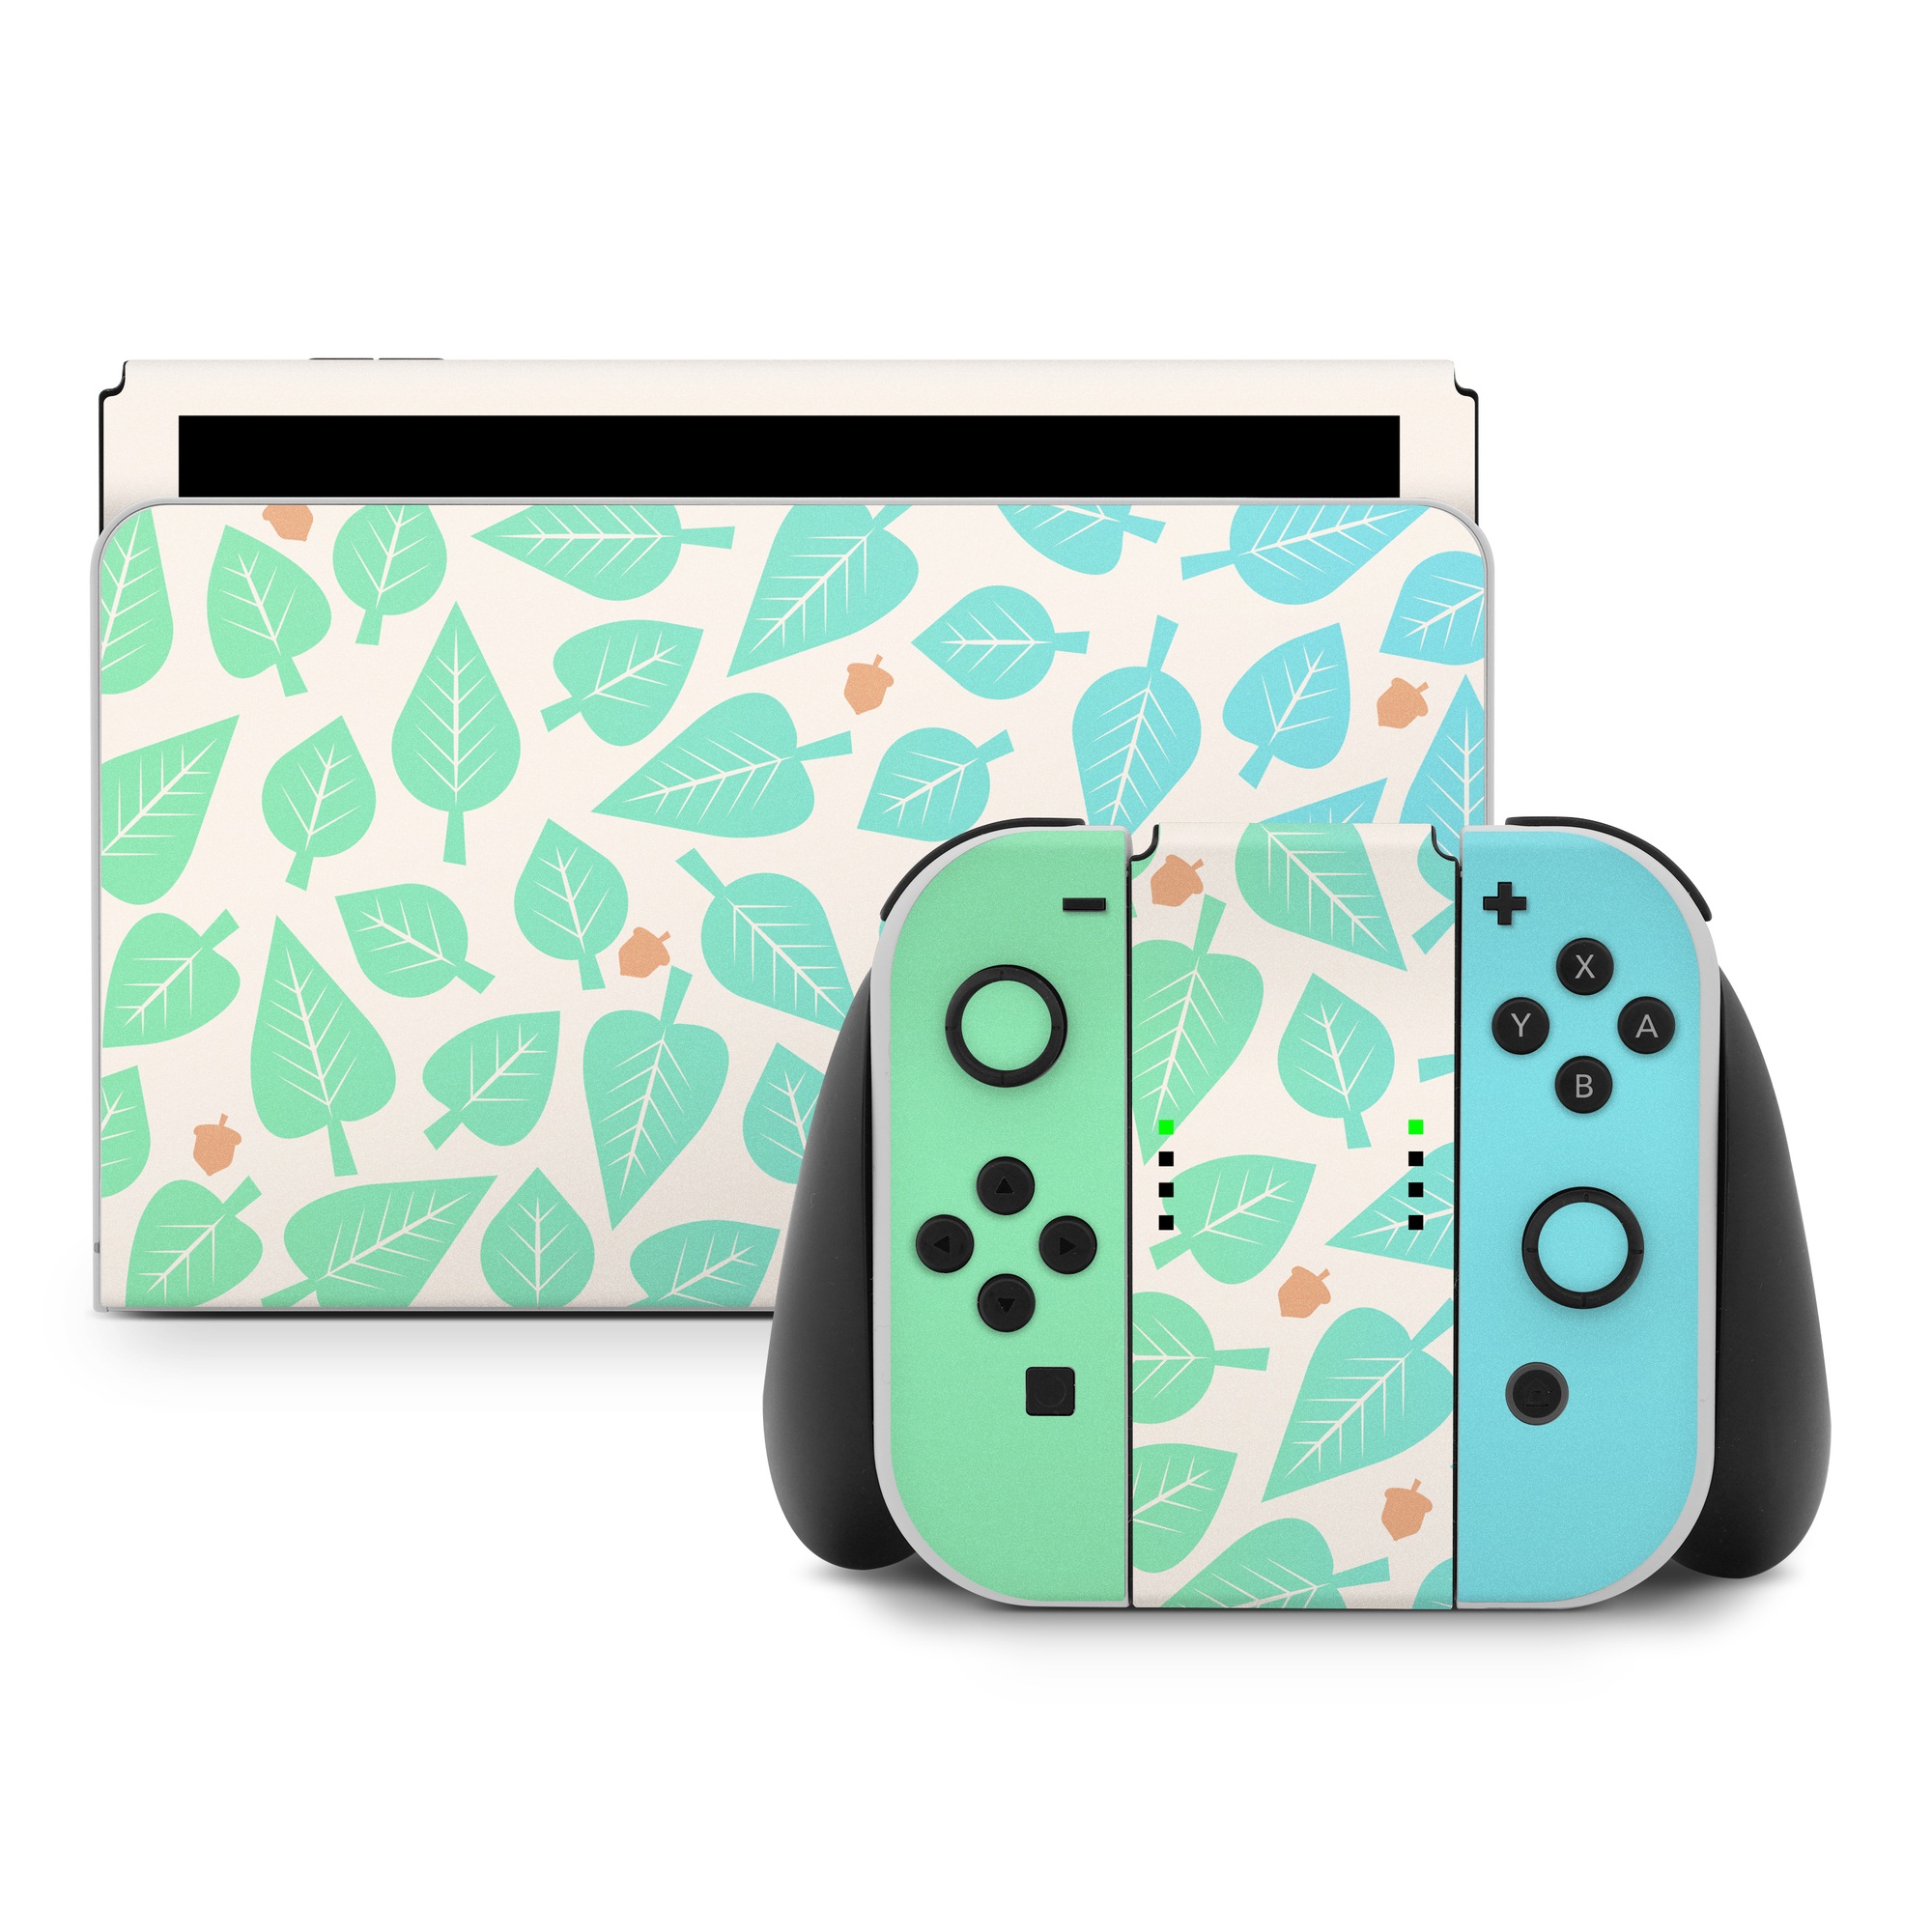 Nintendo Switch Skin design of Aqua, Pattern, Turquoise, Teal, Wrapping paper, Design, Wallpaper, with yellow, green, orange colors